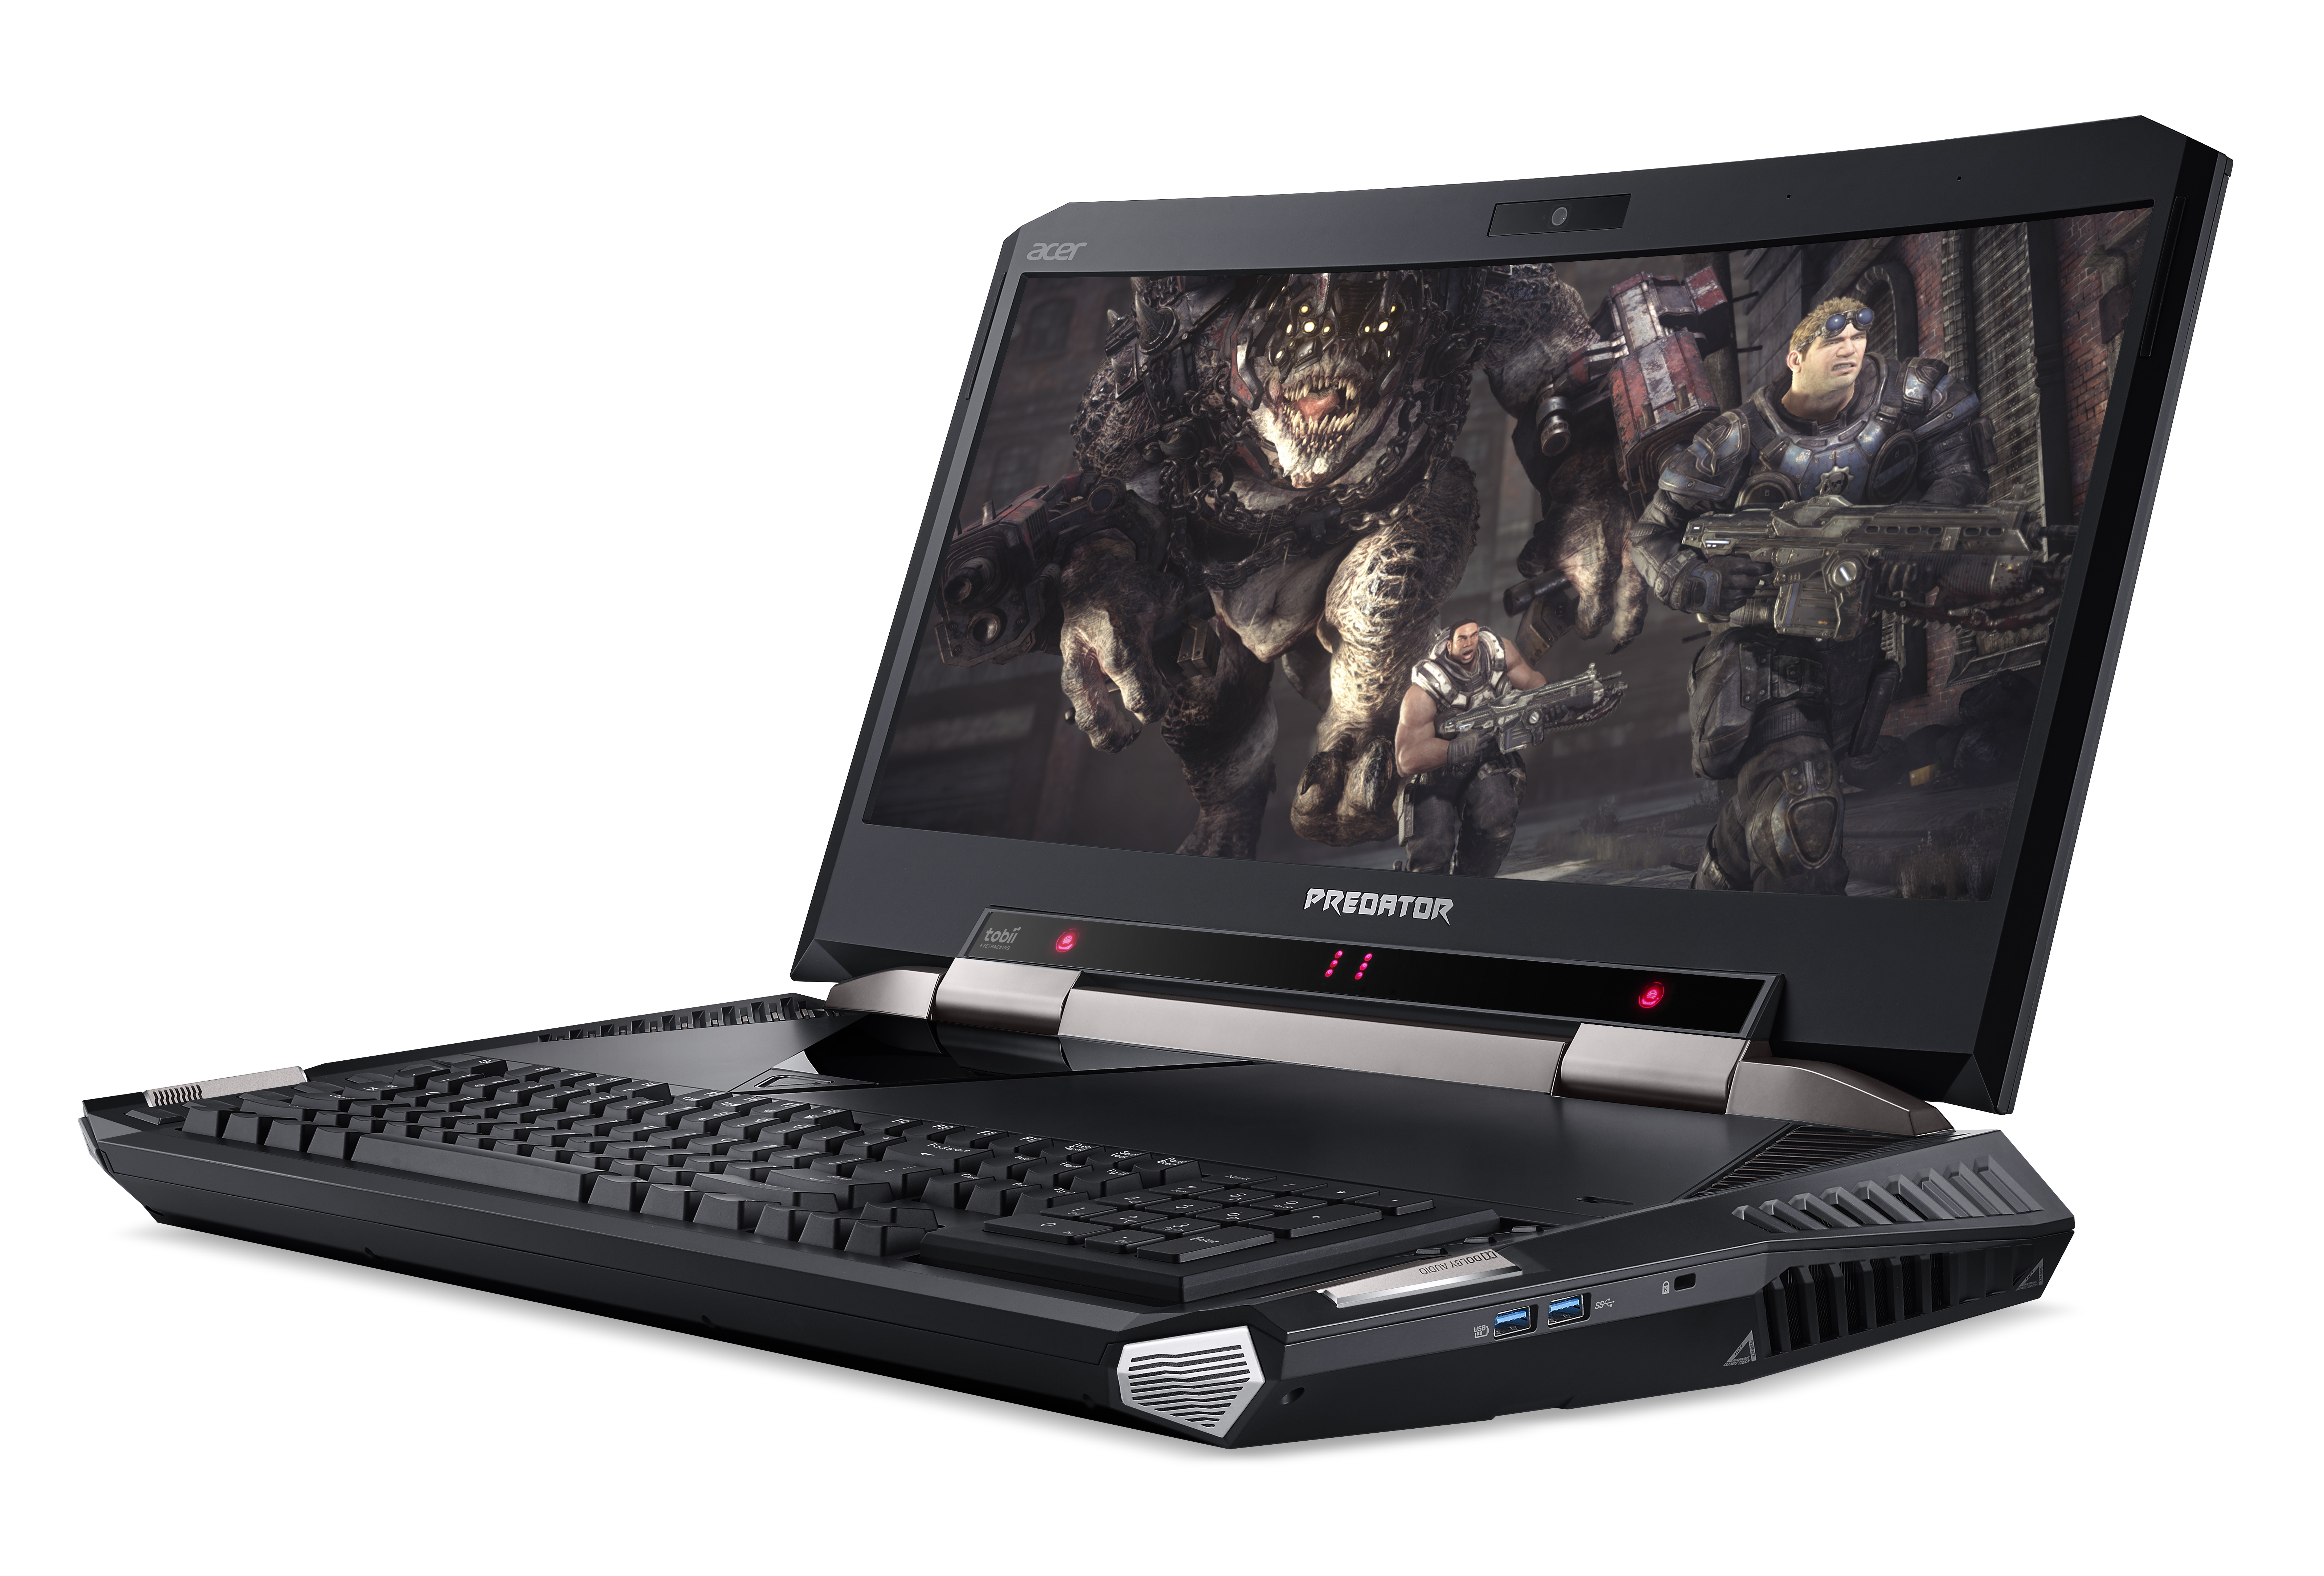 Acer announces Predator 21 X gaming notebook with curved